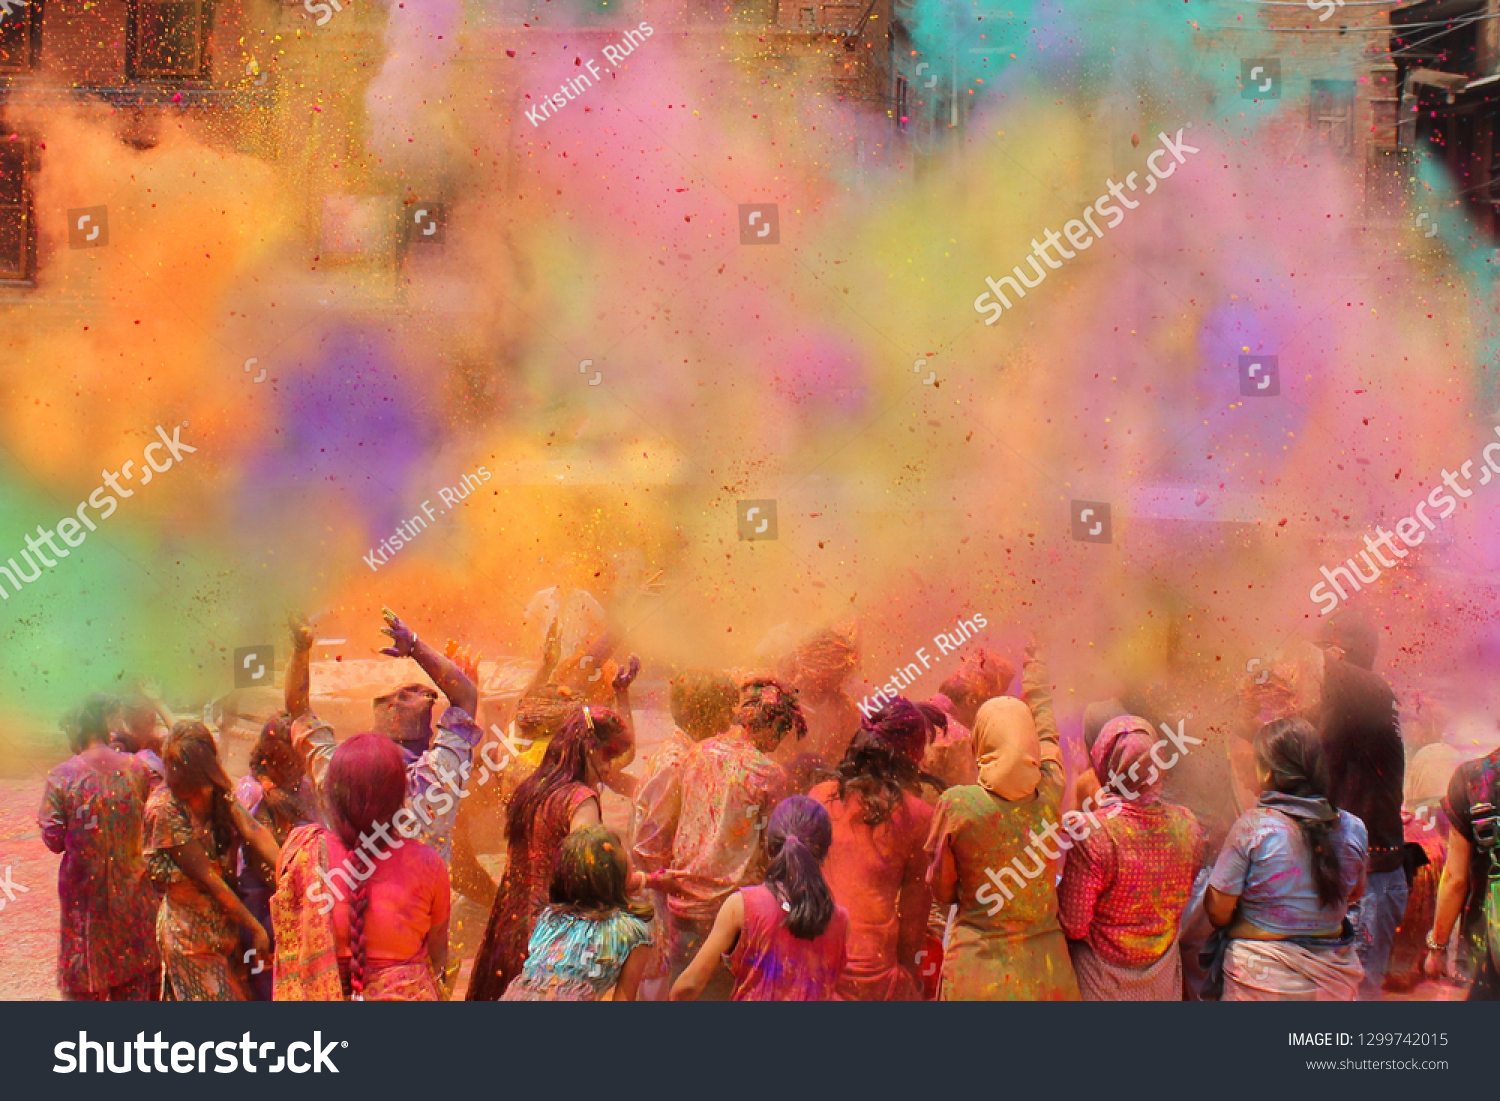 People celebrating the Holi festival of colors in Nepal or India #1299742015